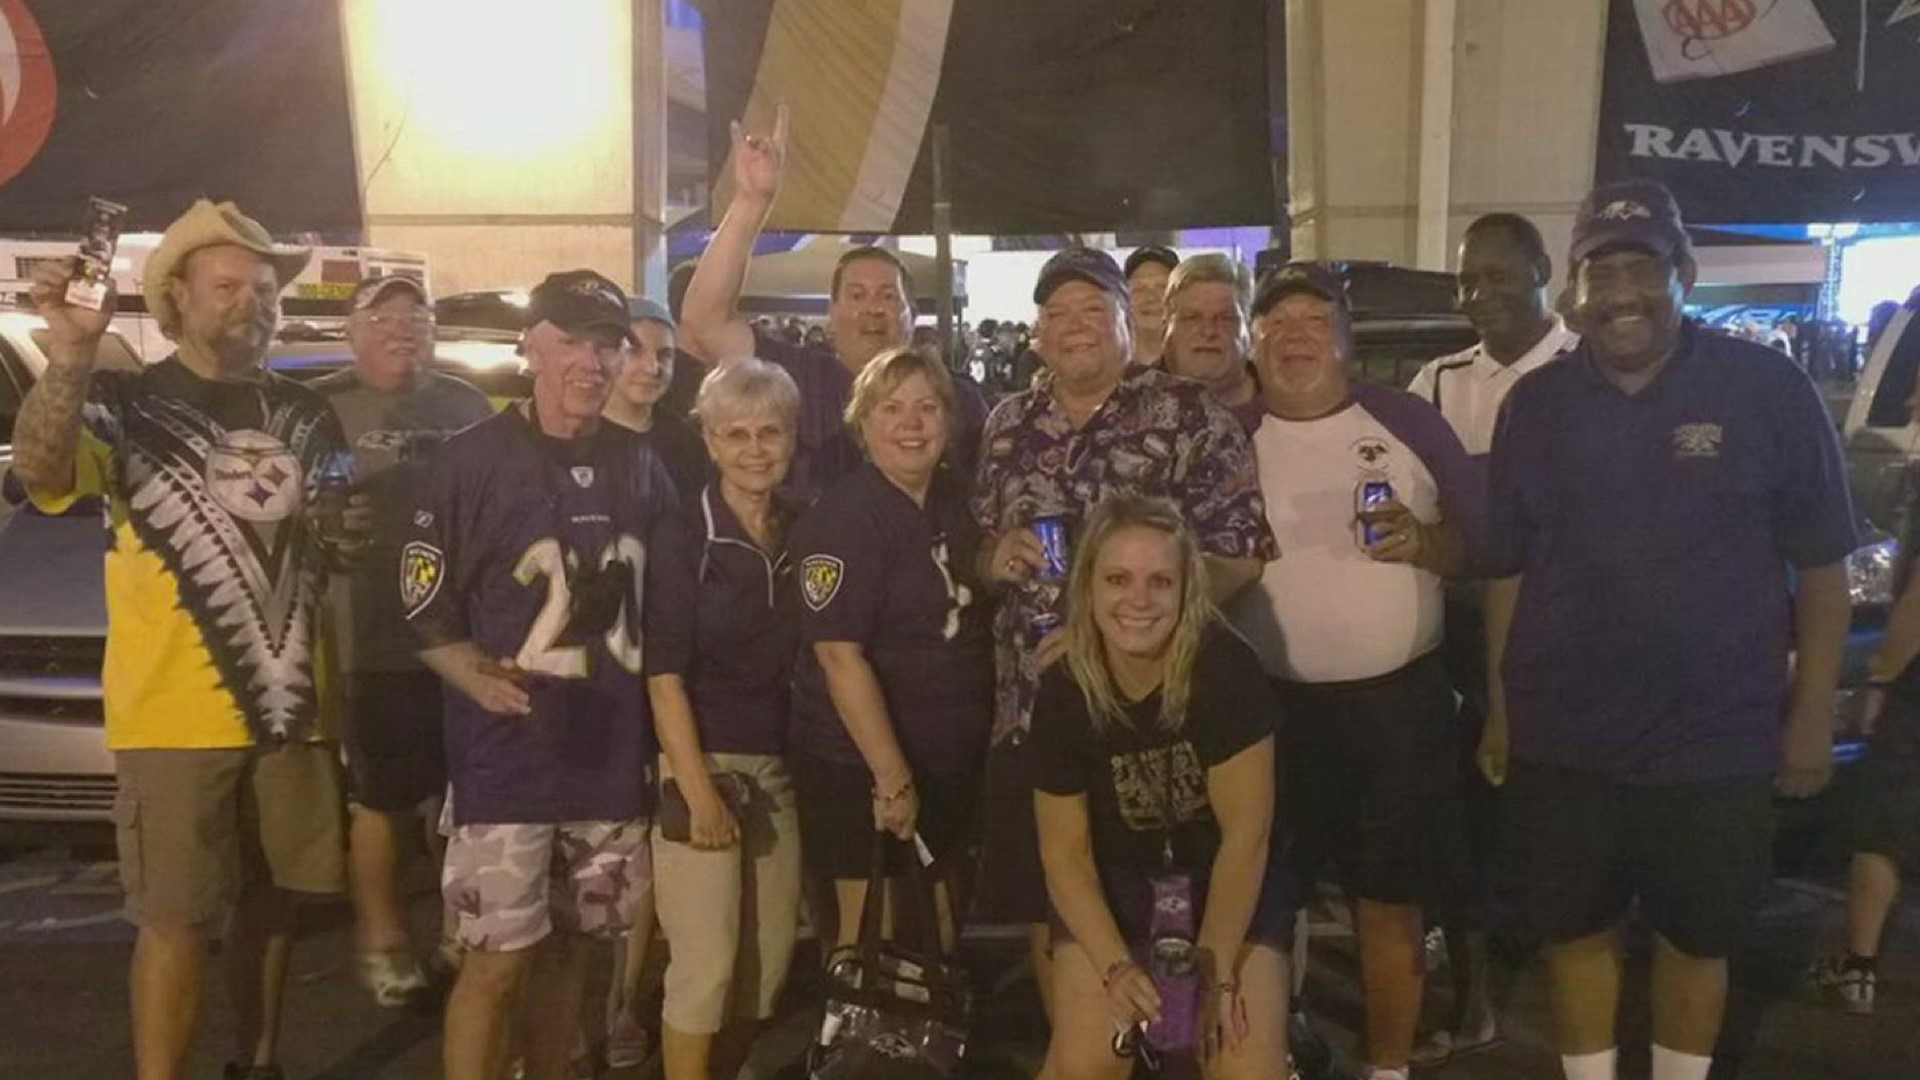 Fans of the team are gearing up to cheer on their Ravens, who are just one win from the Super Bowl.